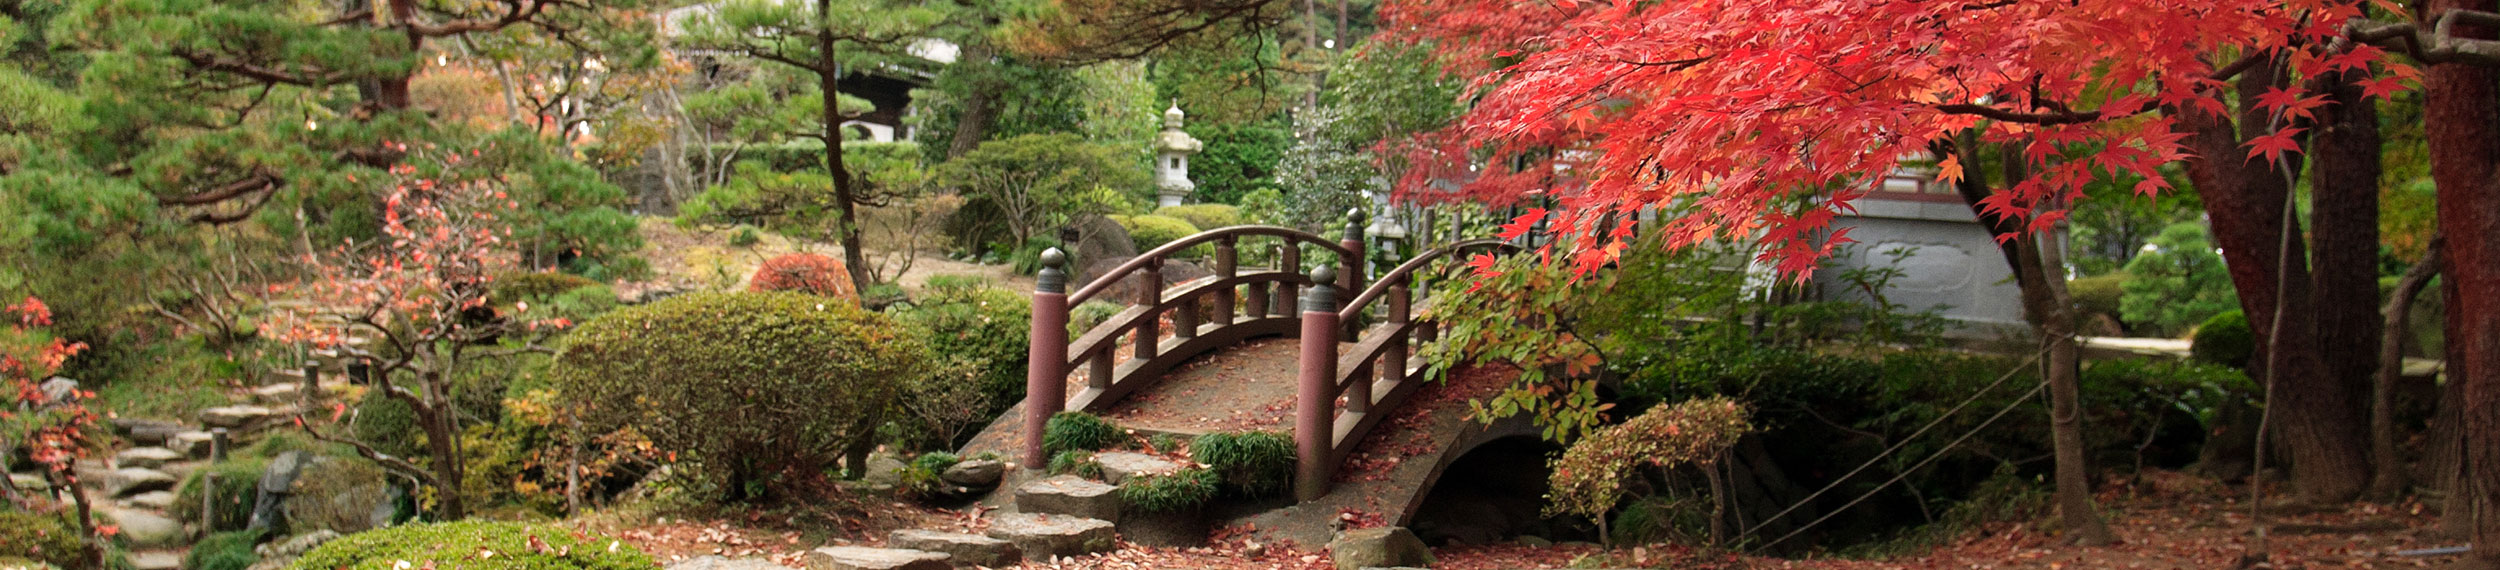 A Bright Red Maple tree hangs over the bridge in a Japanese garden in Sendai, Japan.